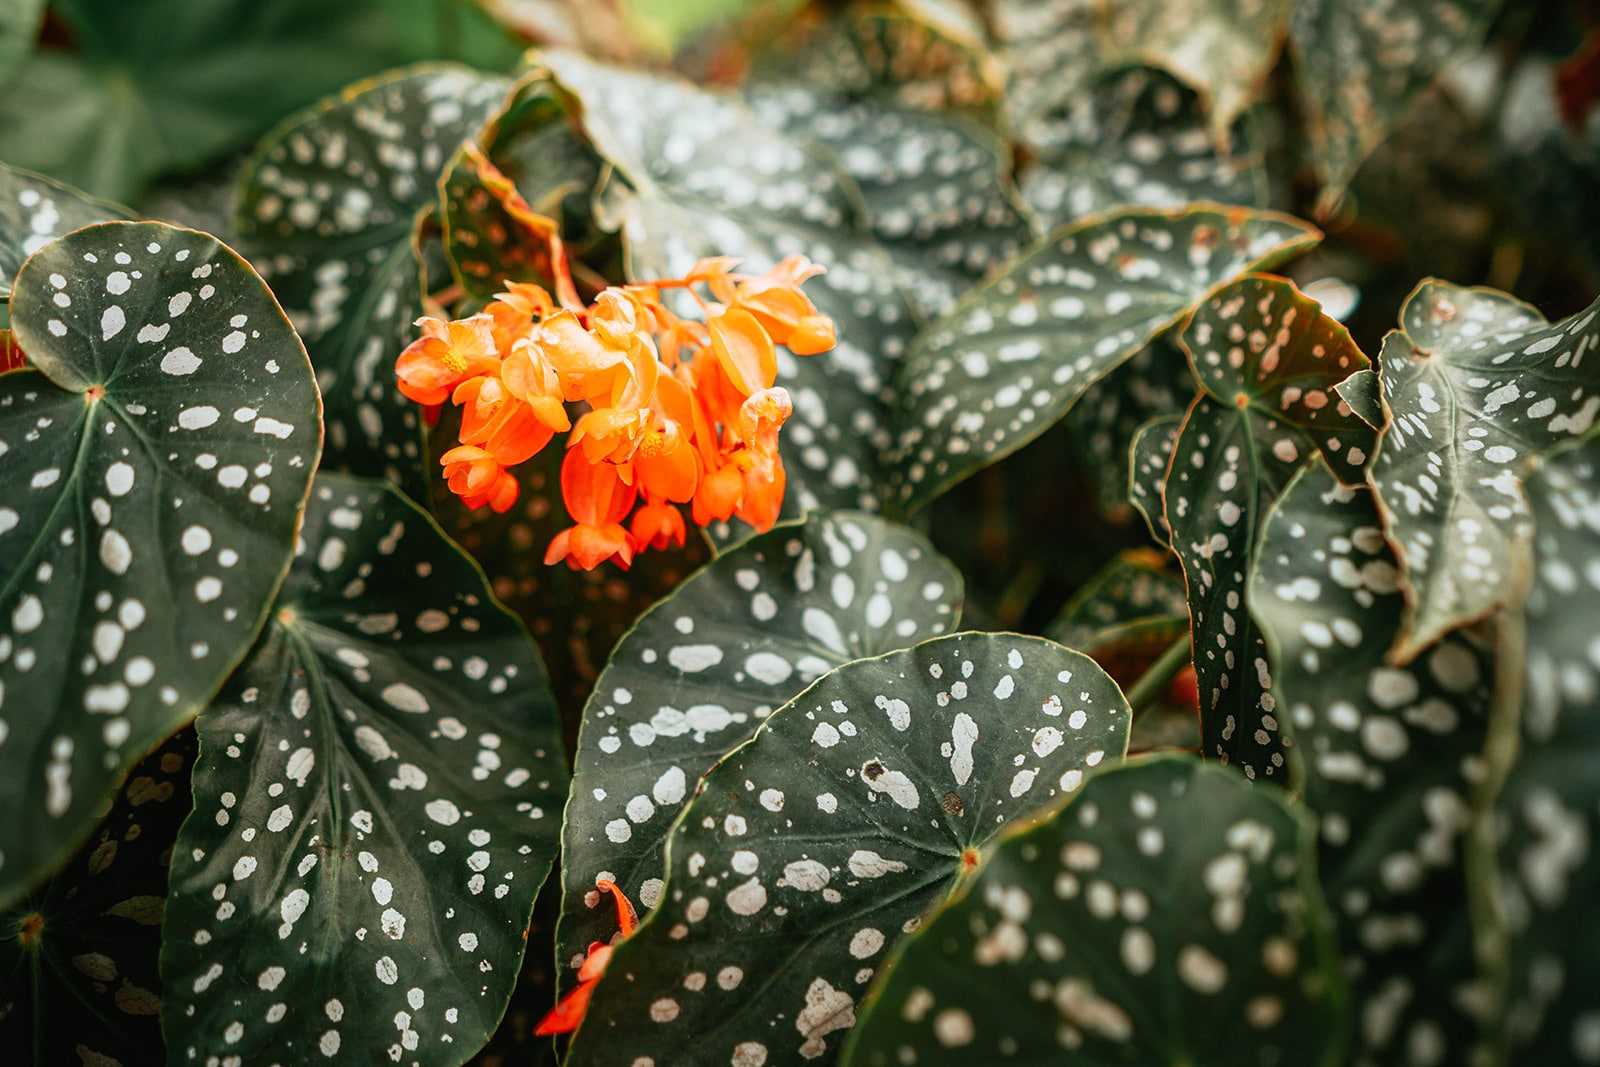 Begonia maculata plant (trout Begonia) wiwth deep green spotted leaves and orange flowers